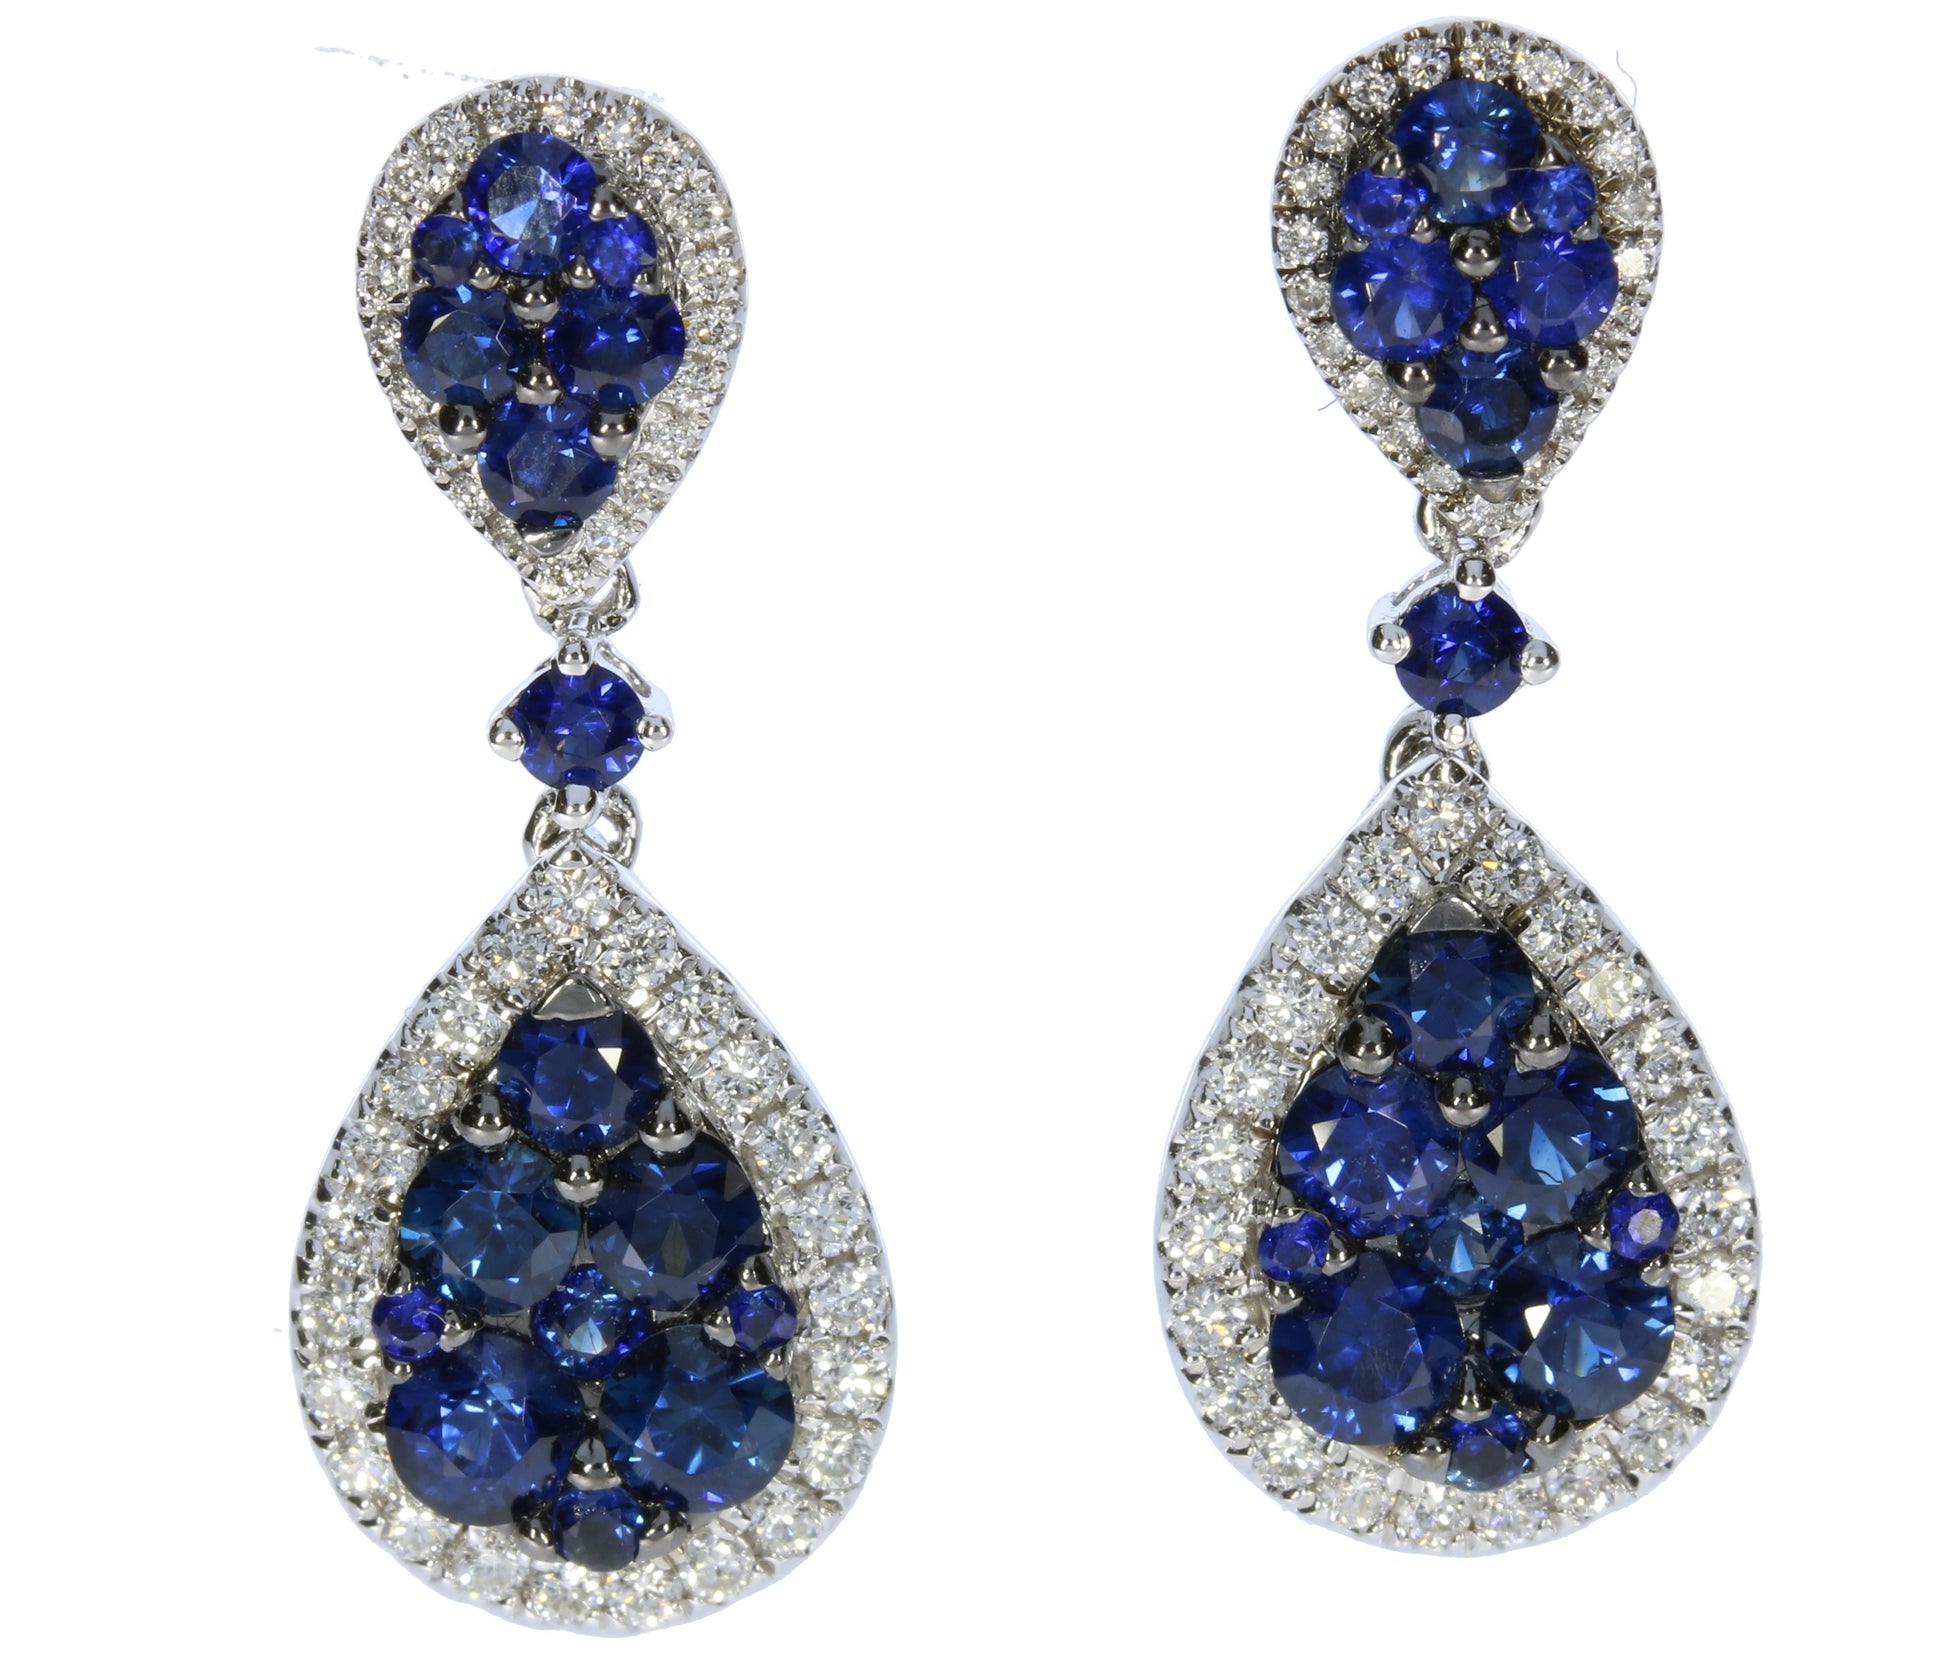 White Gold Sapphire and Diamond Drop Earrings - Colored Stone Earrings